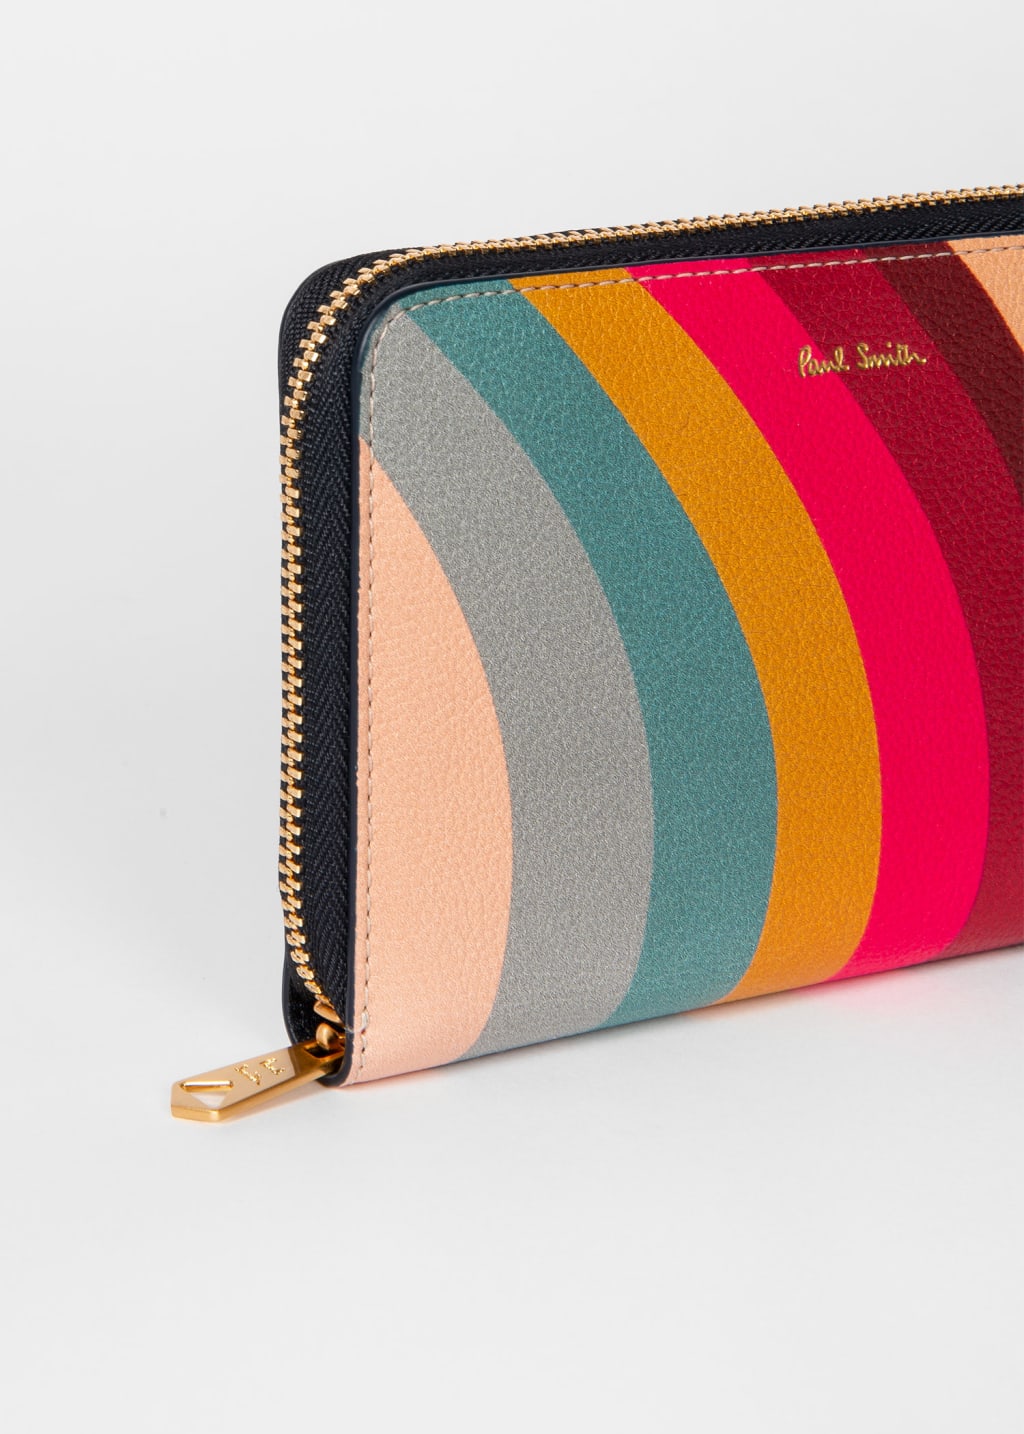 Product View - Medium 'Swirl' Leather Zip-Around Purse by Paul Smith